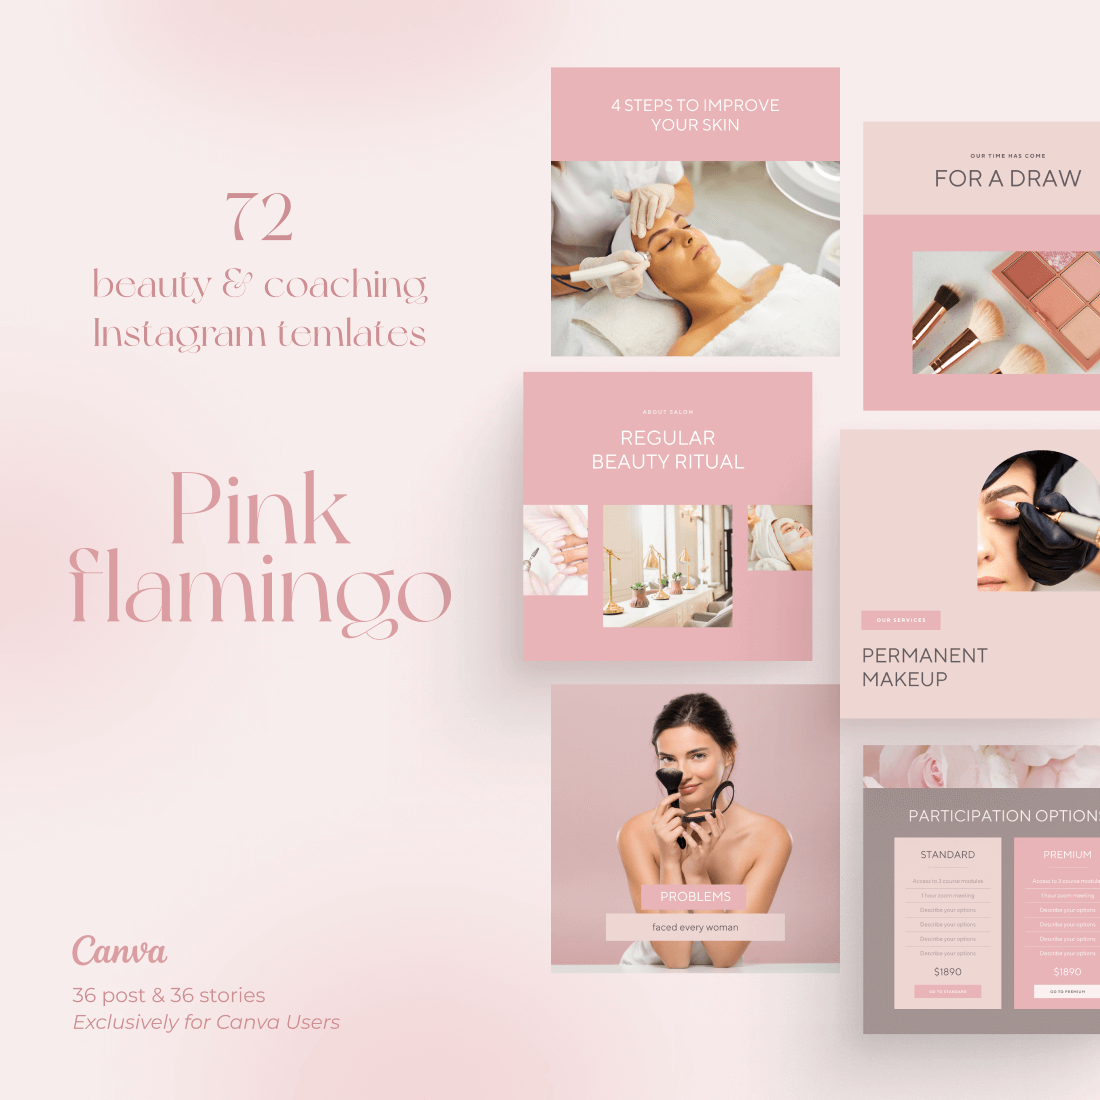 72 Beauty & Coaching Instagram Templates cover image.